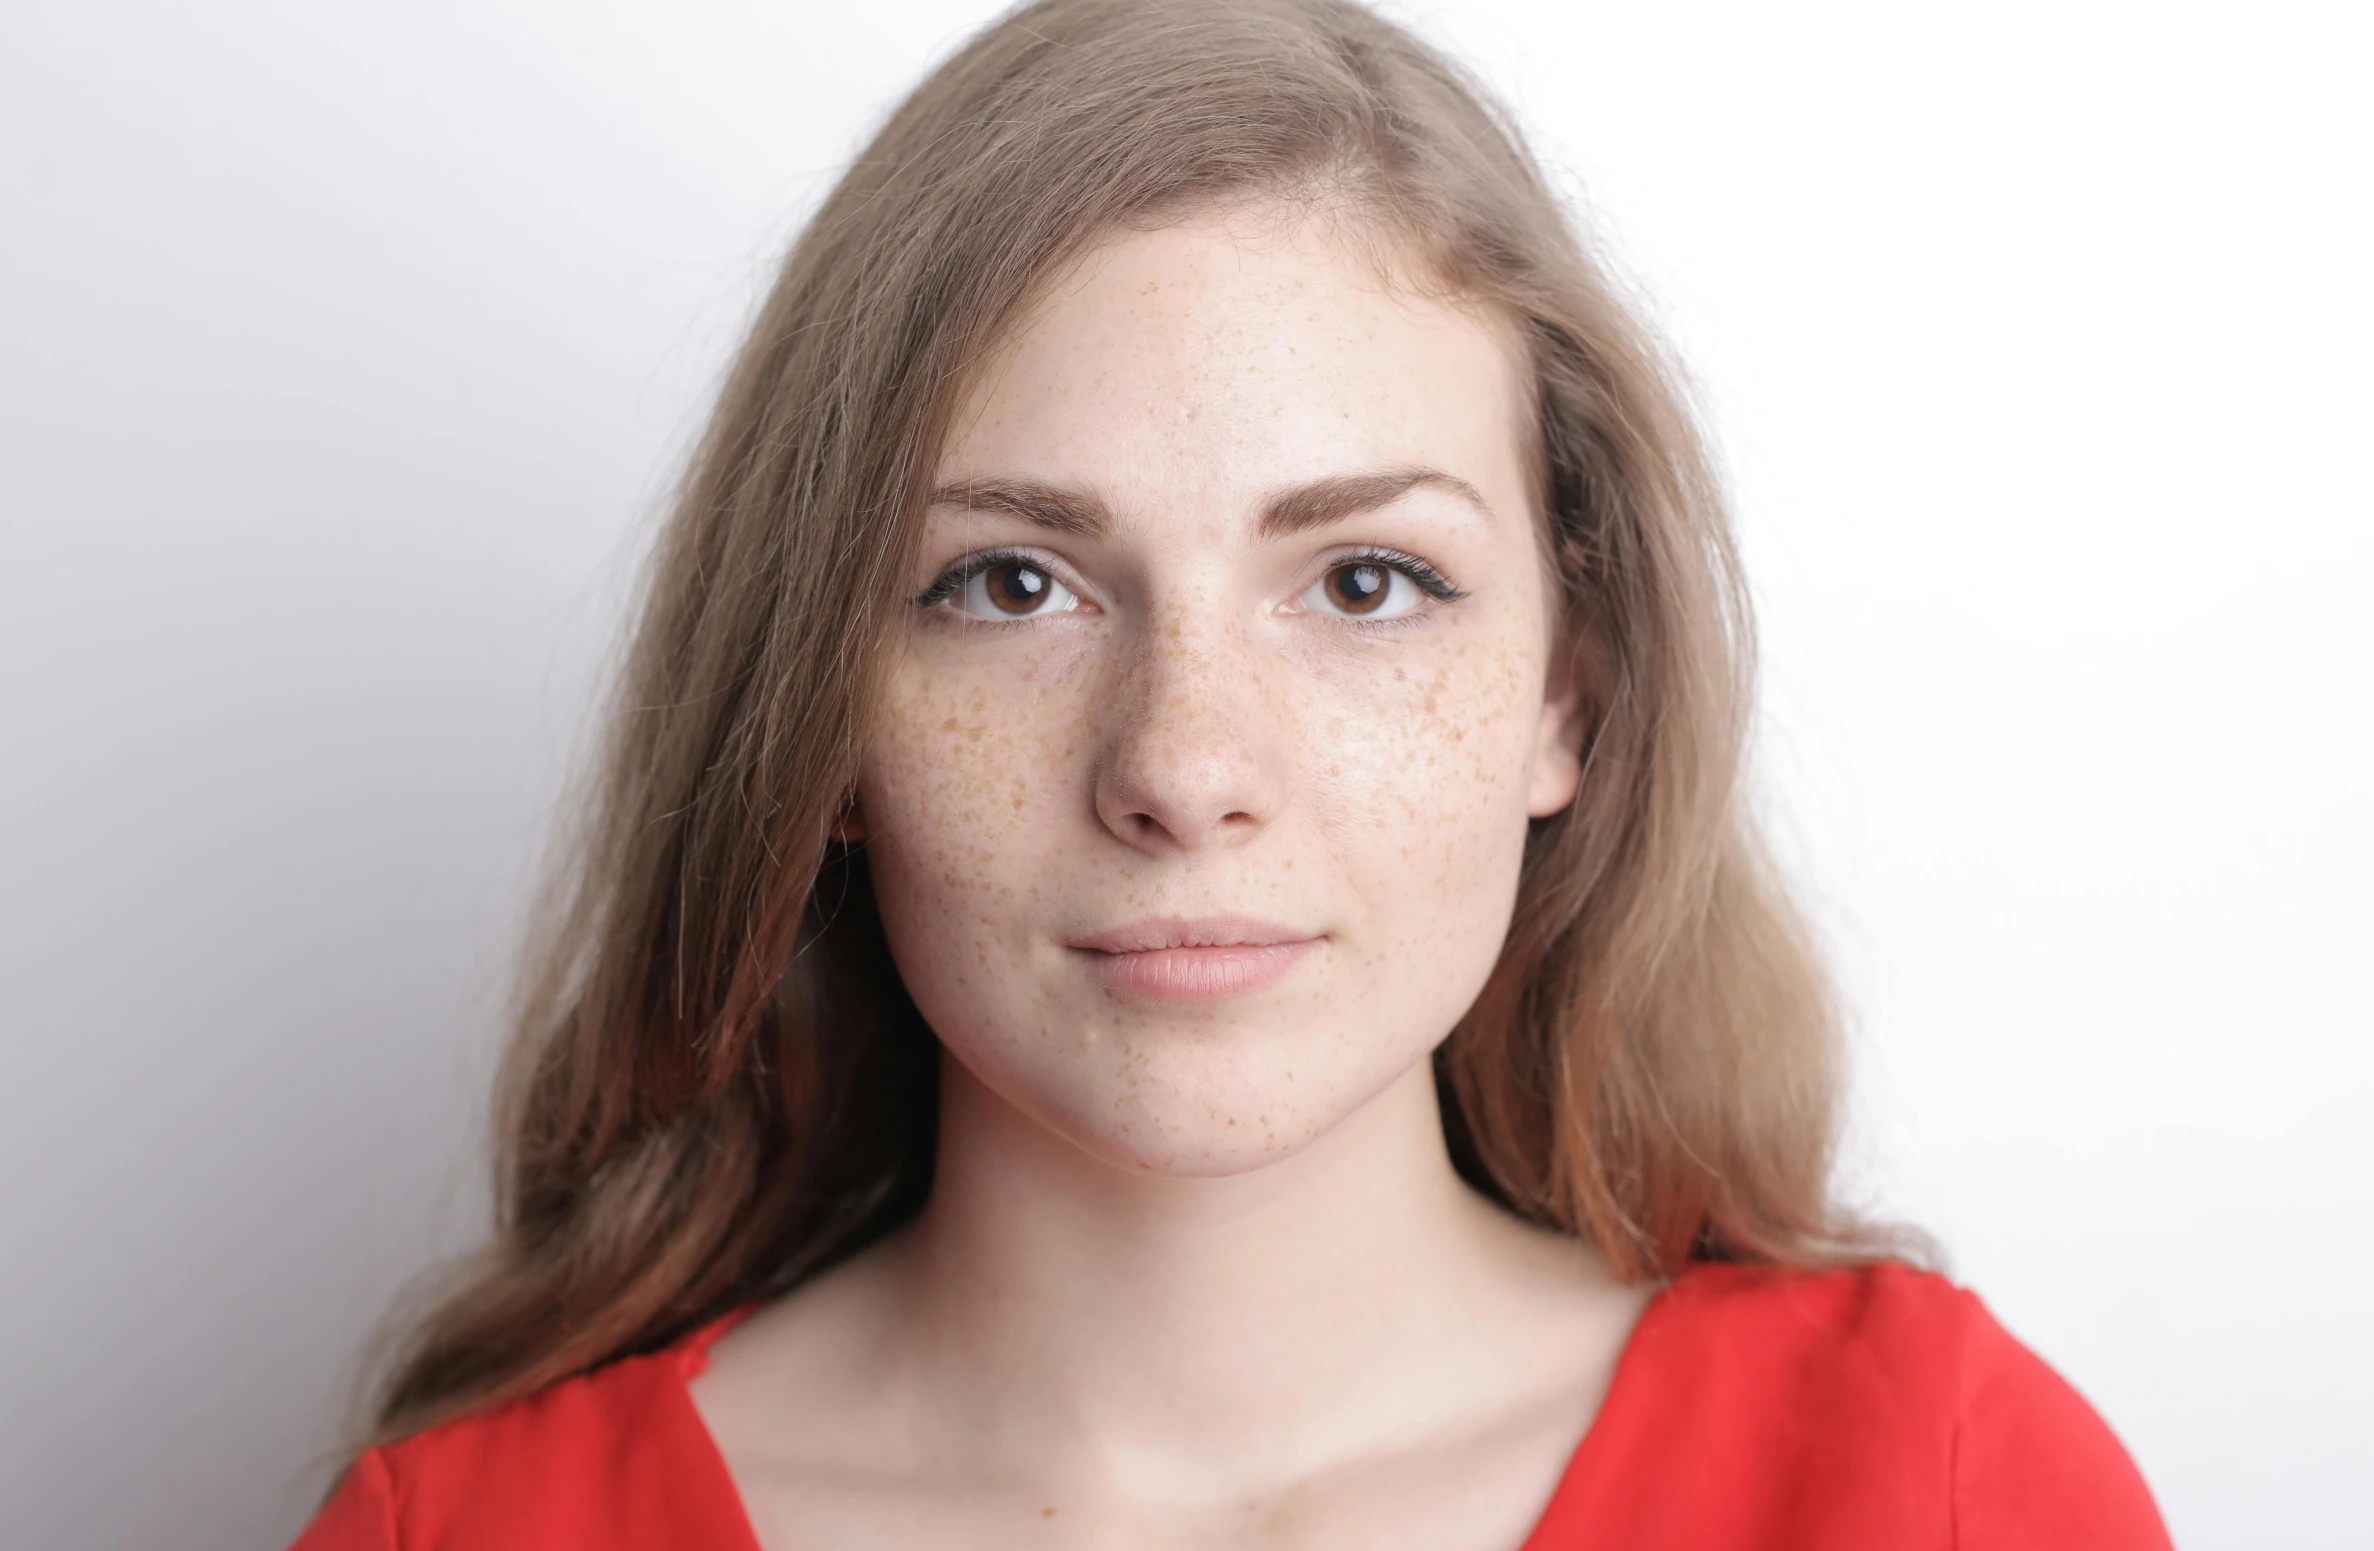 a close up of a woman with freckles on her face, passport photo, olya bossak, slightly red, ready to model